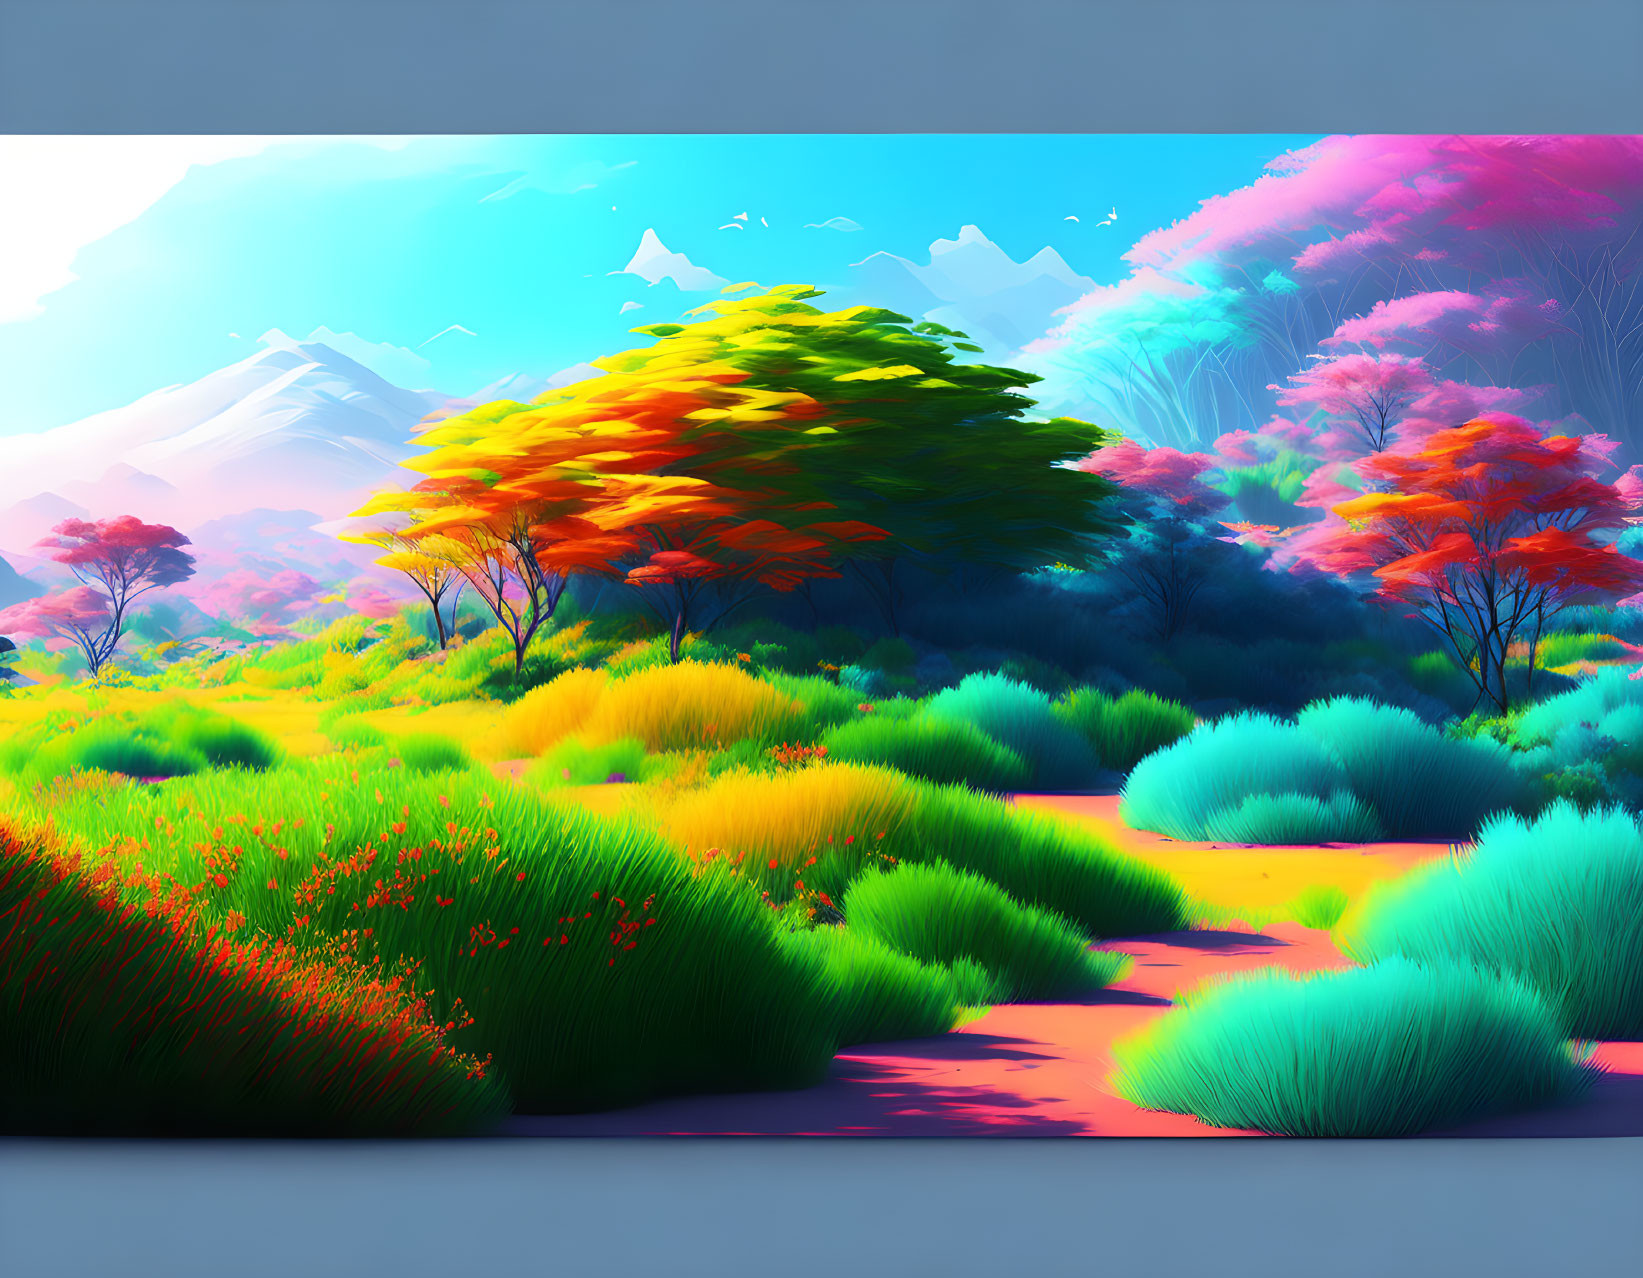 Colorful digital artwork of vibrant landscape with stylized mountains